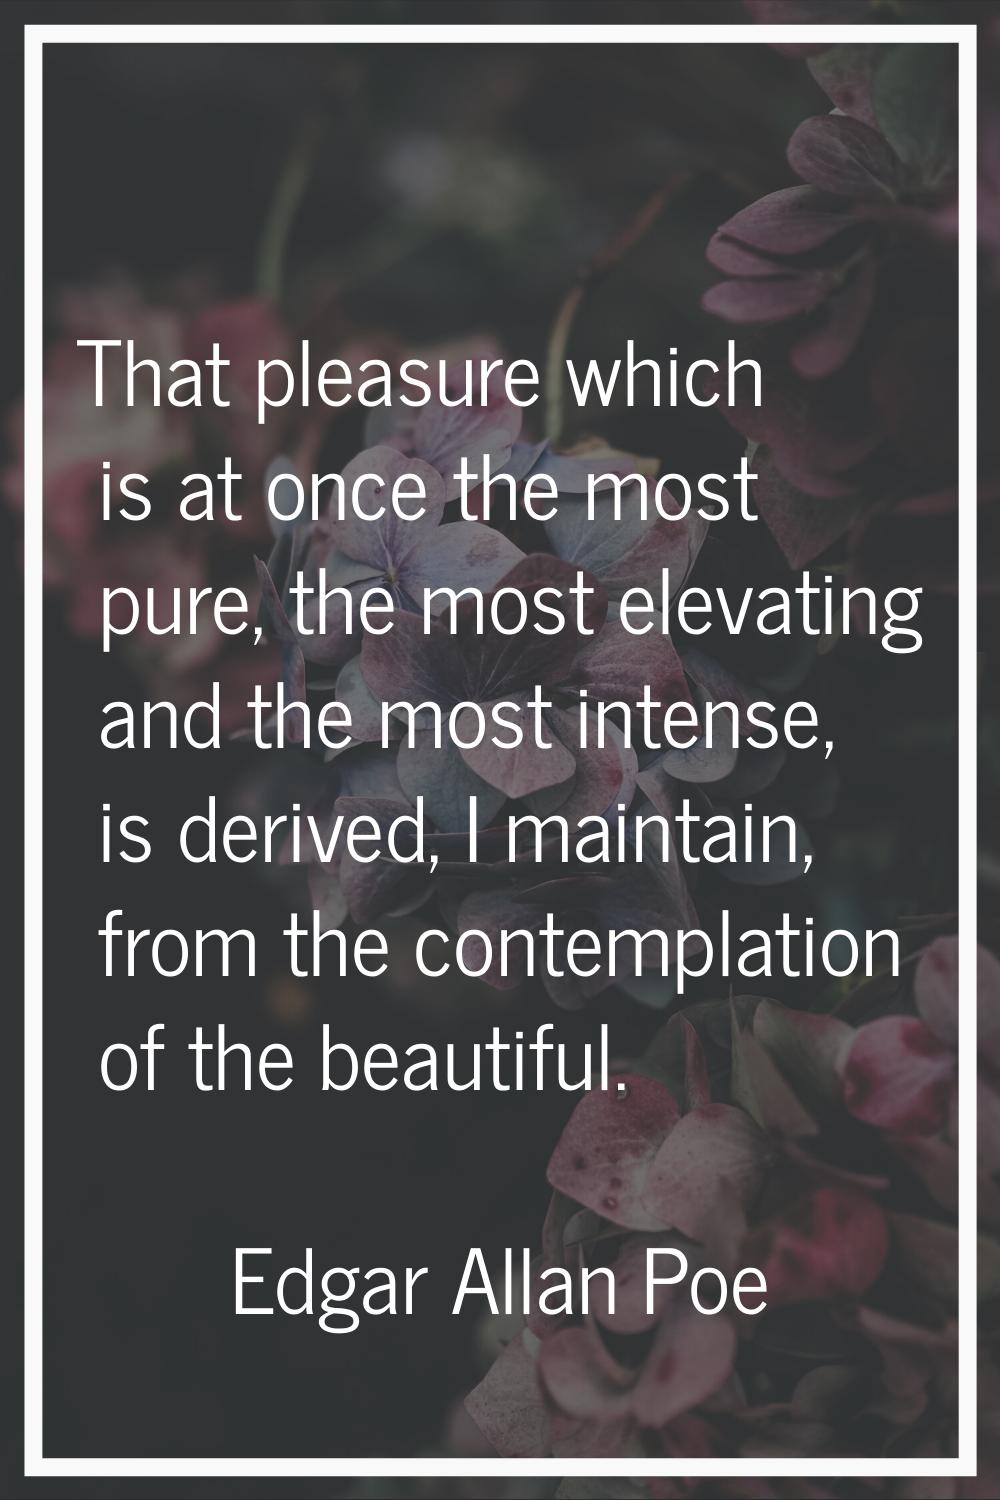 That pleasure which is at once the most pure, the most elevating and the most intense, is derived, 